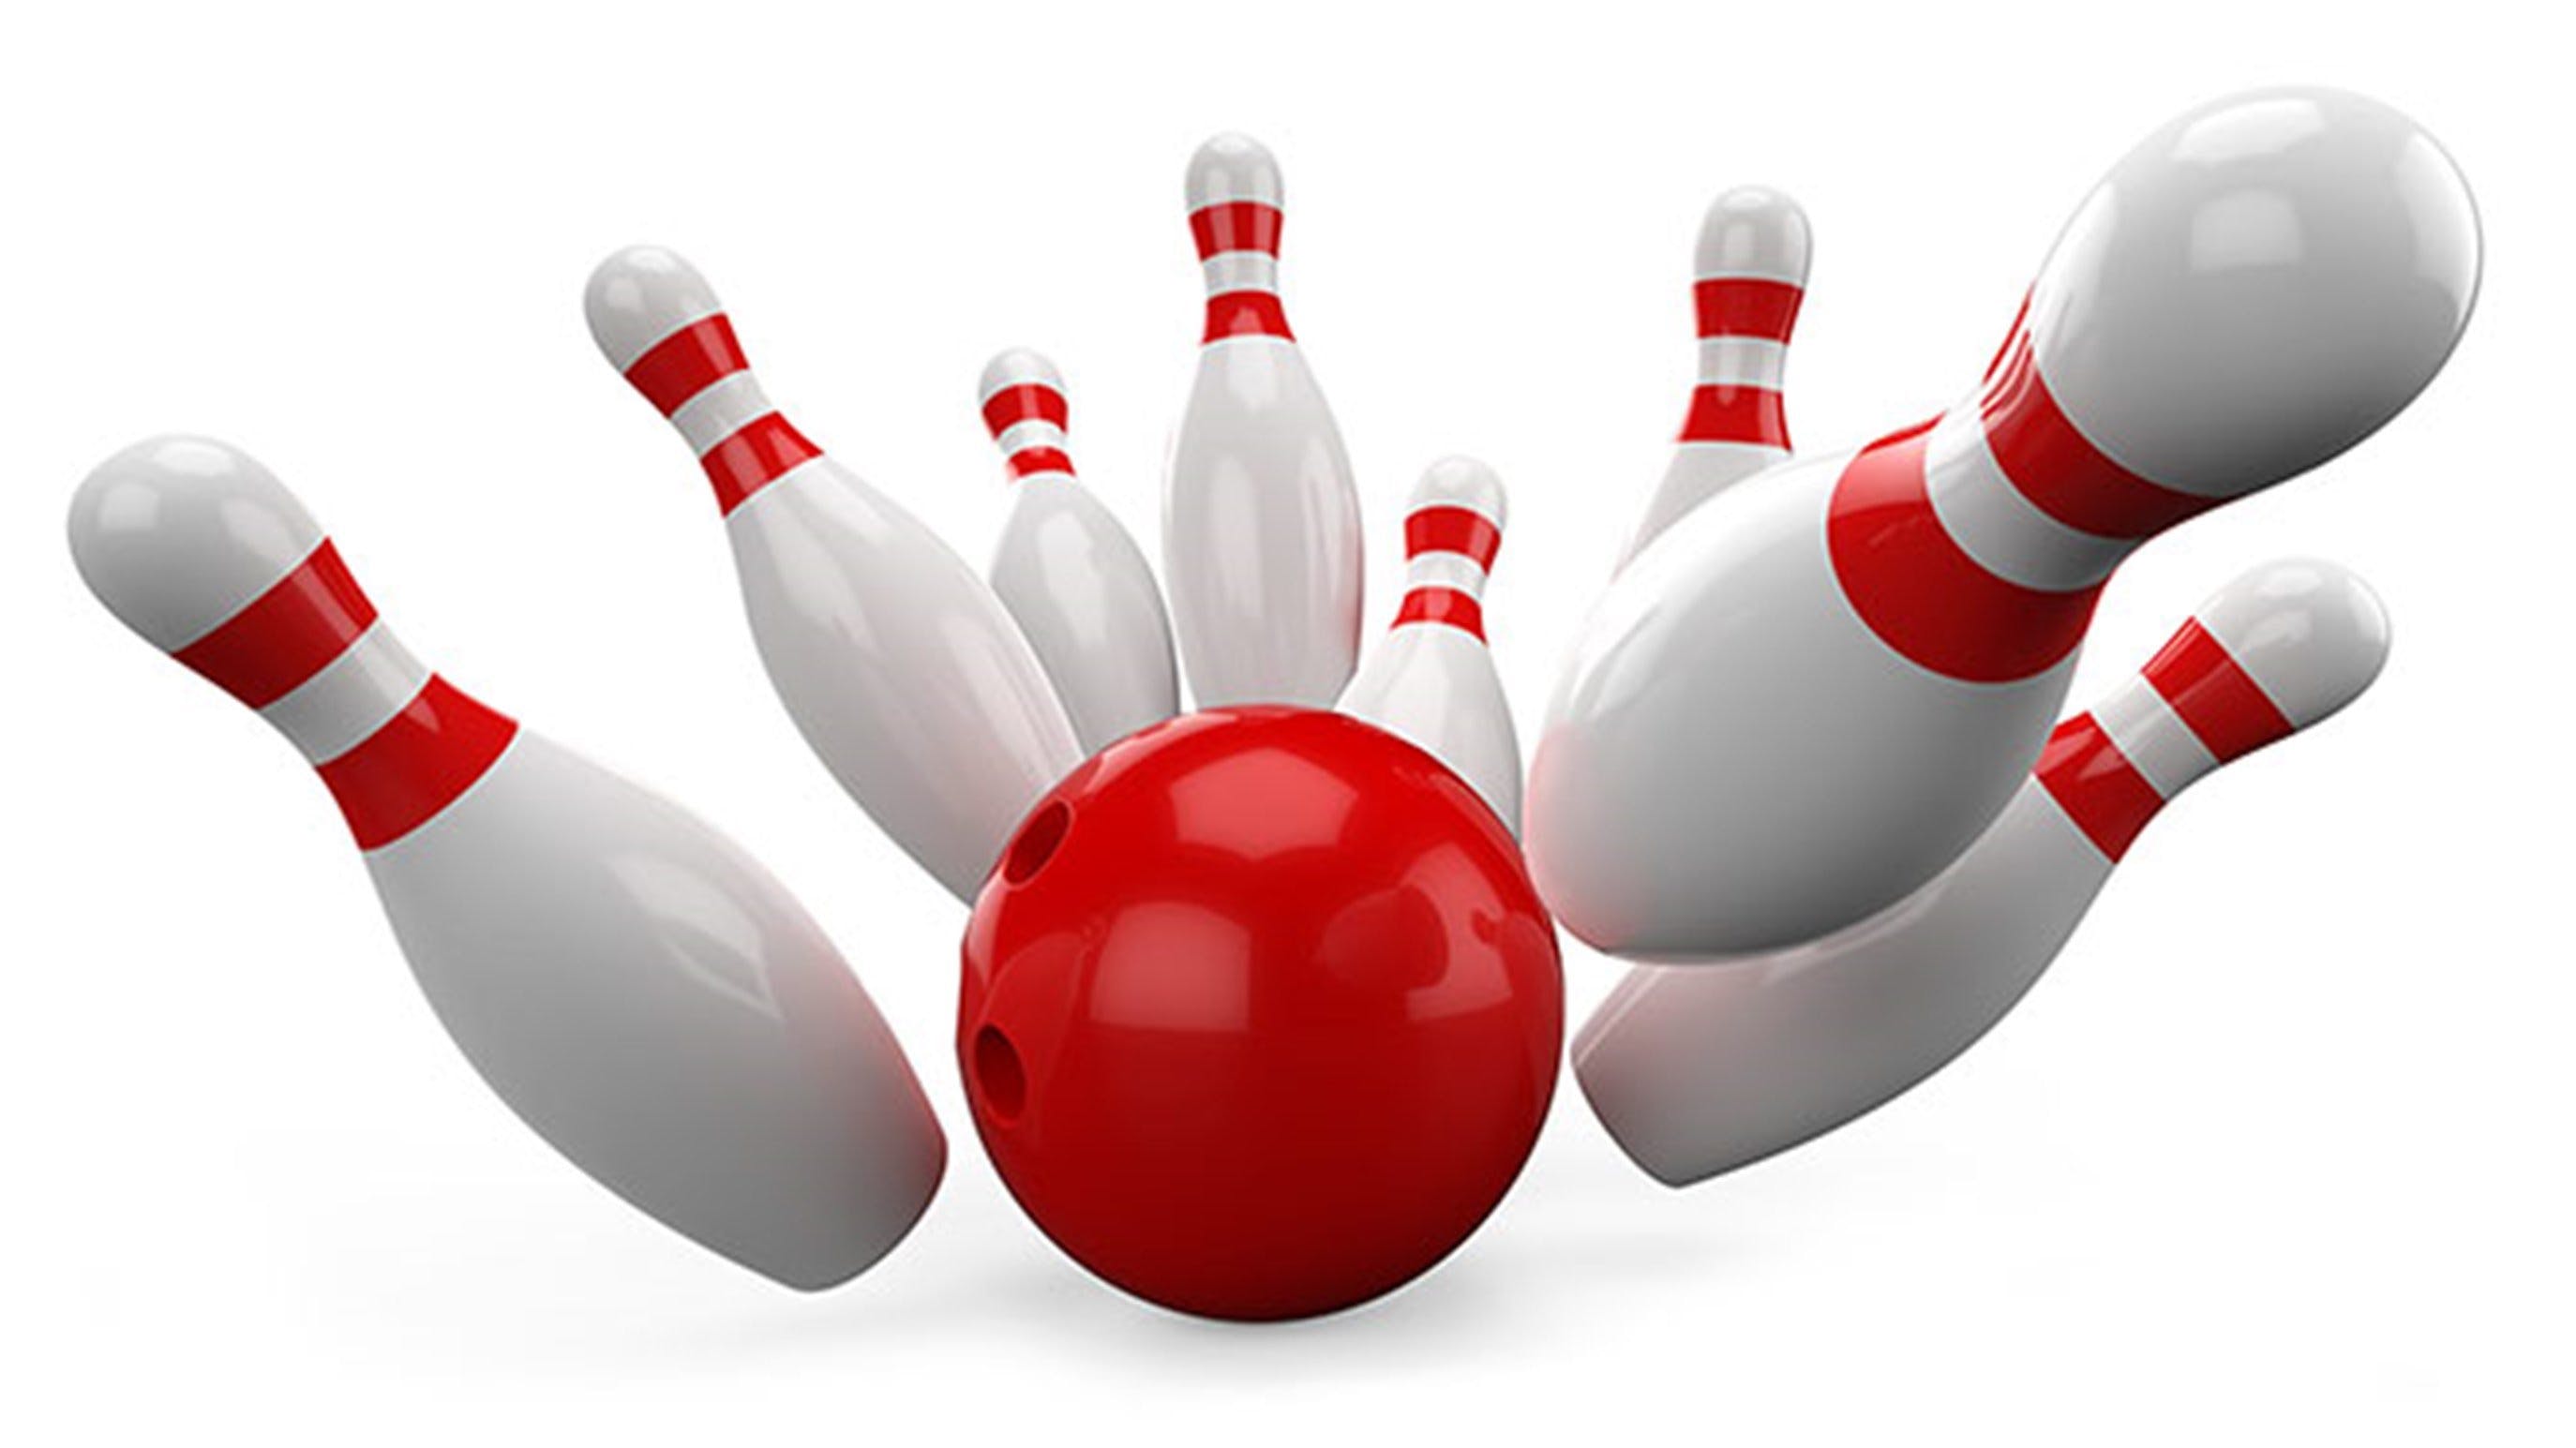 Shellharbour Tenpin Bowl - Find Attractions